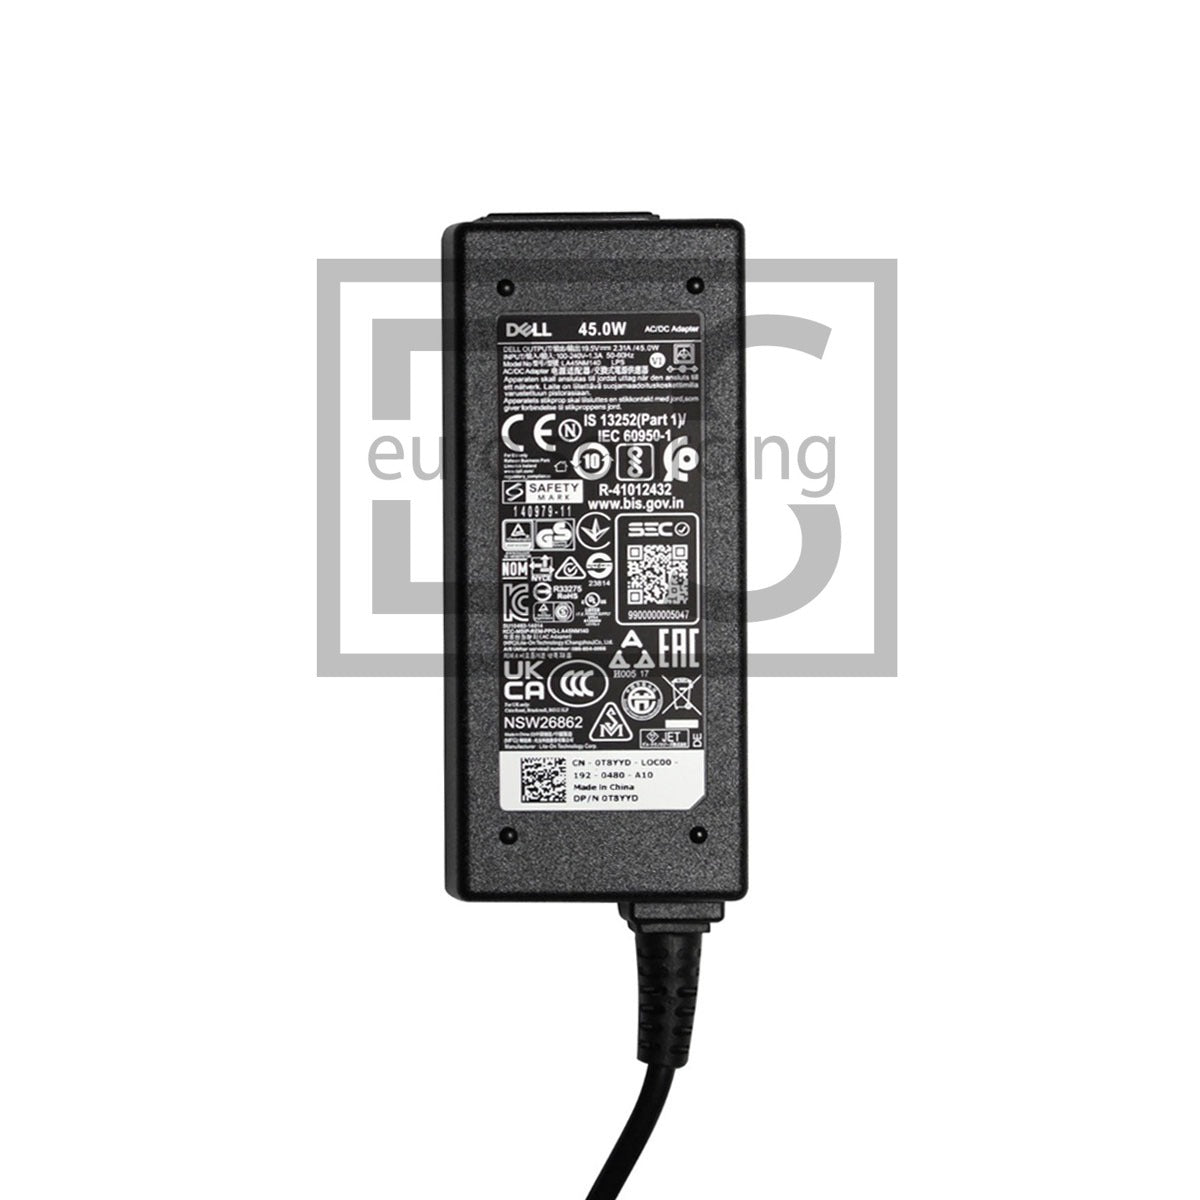 Genuine DELL 19.5V 2.31A DELC231 *ROUND* TYPE DELL BRAND 45W AC ADAPTER 4.5MM x 3.0MM Compatible With DELL XPS 13D-138